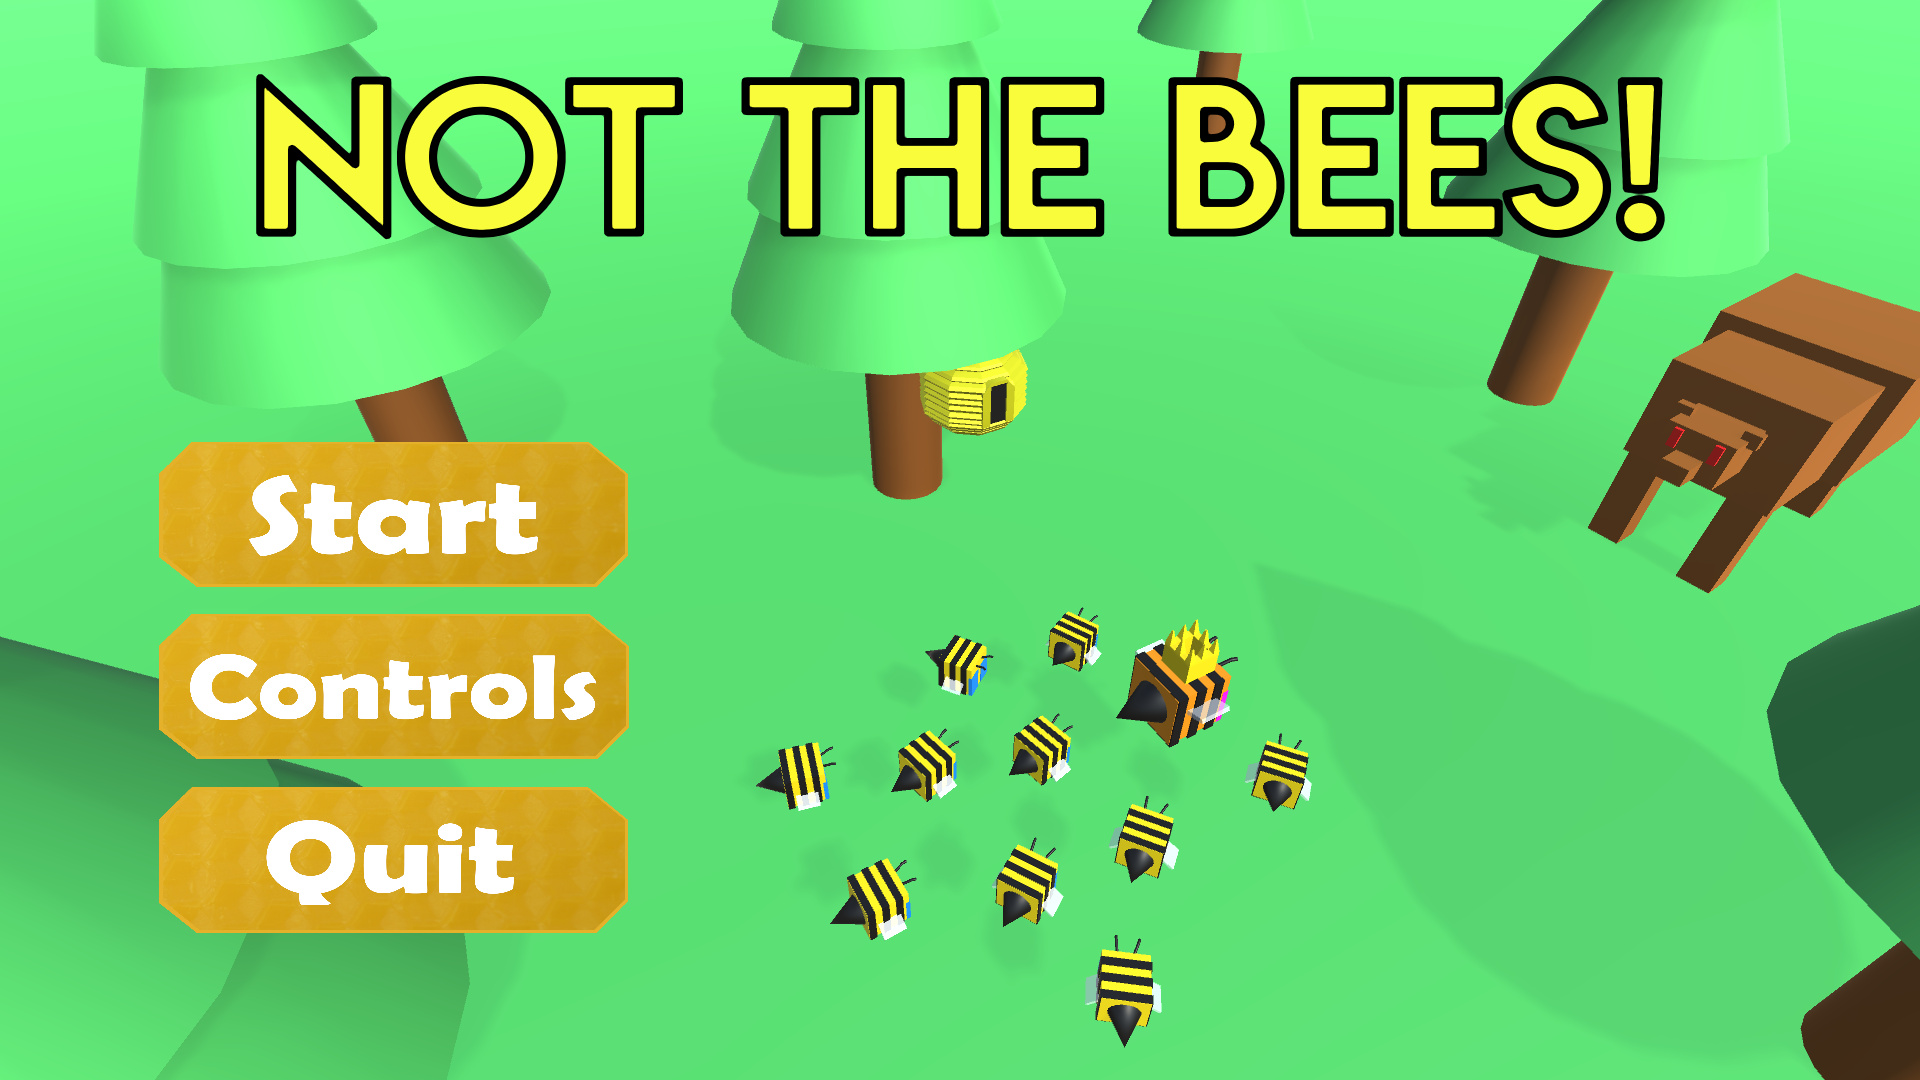 Not the Bees' was a game created for Chico State's Local Game Jam 2019